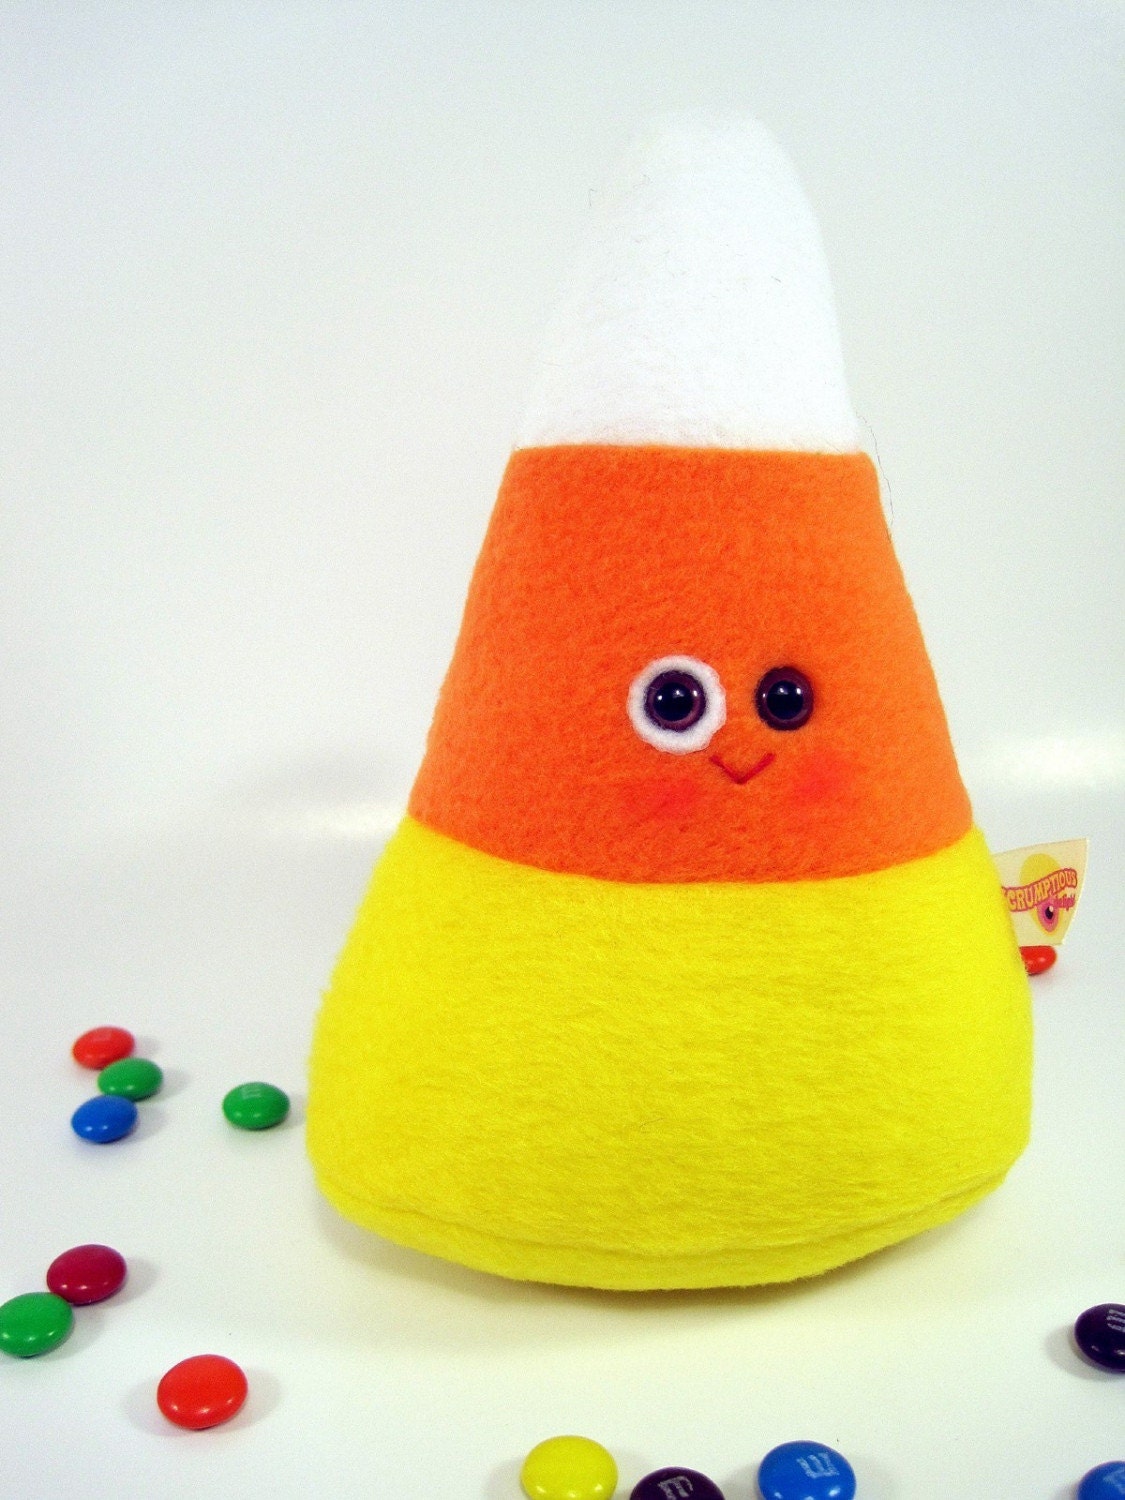 One Little Candy Corn....